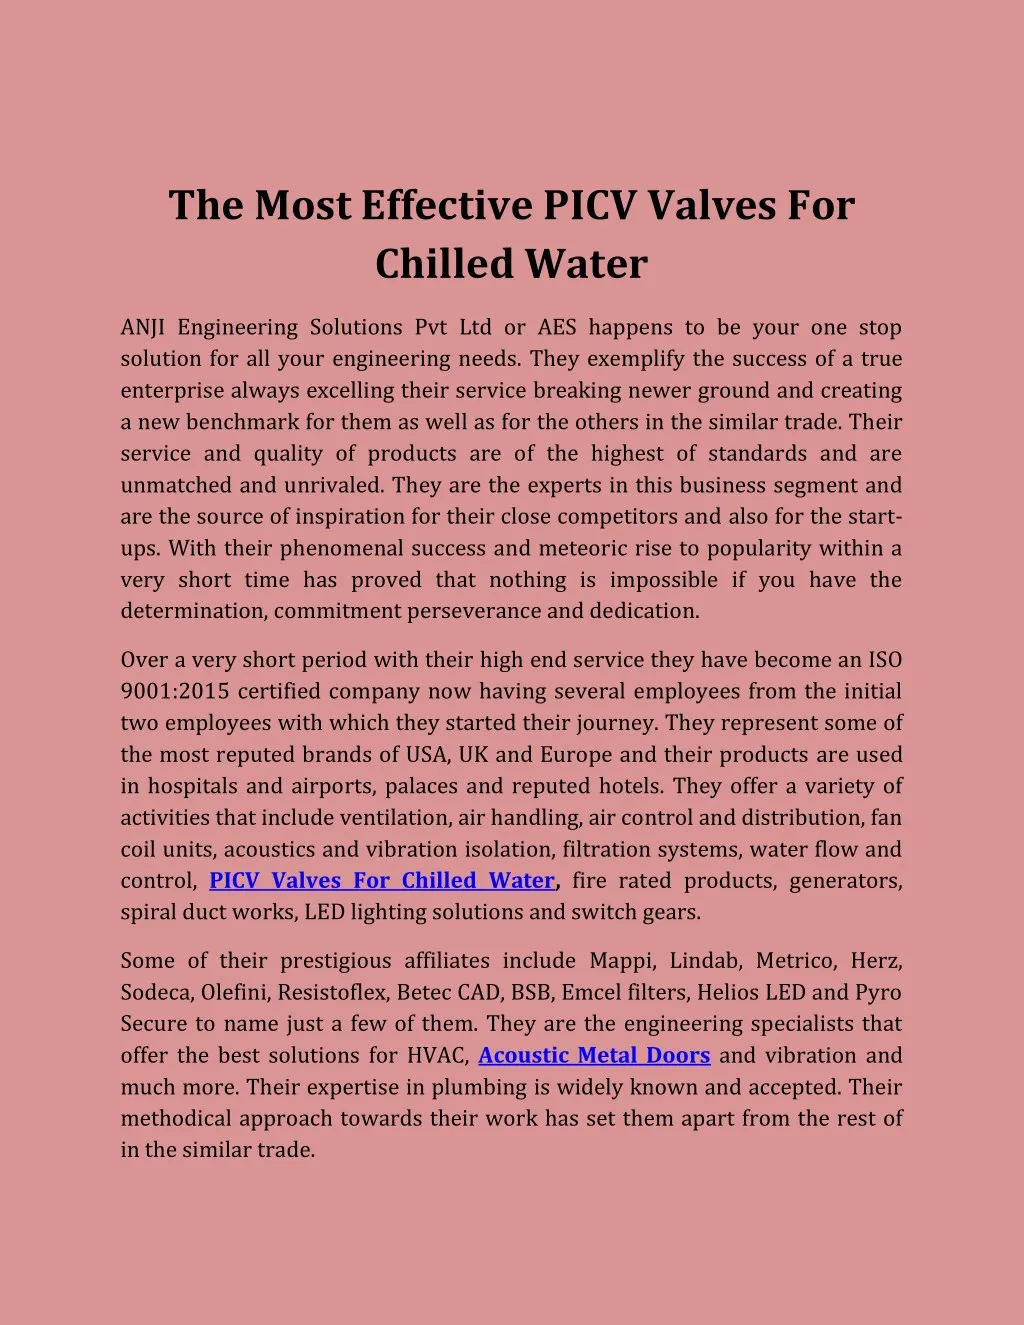 the most effective picv valves for chilled water